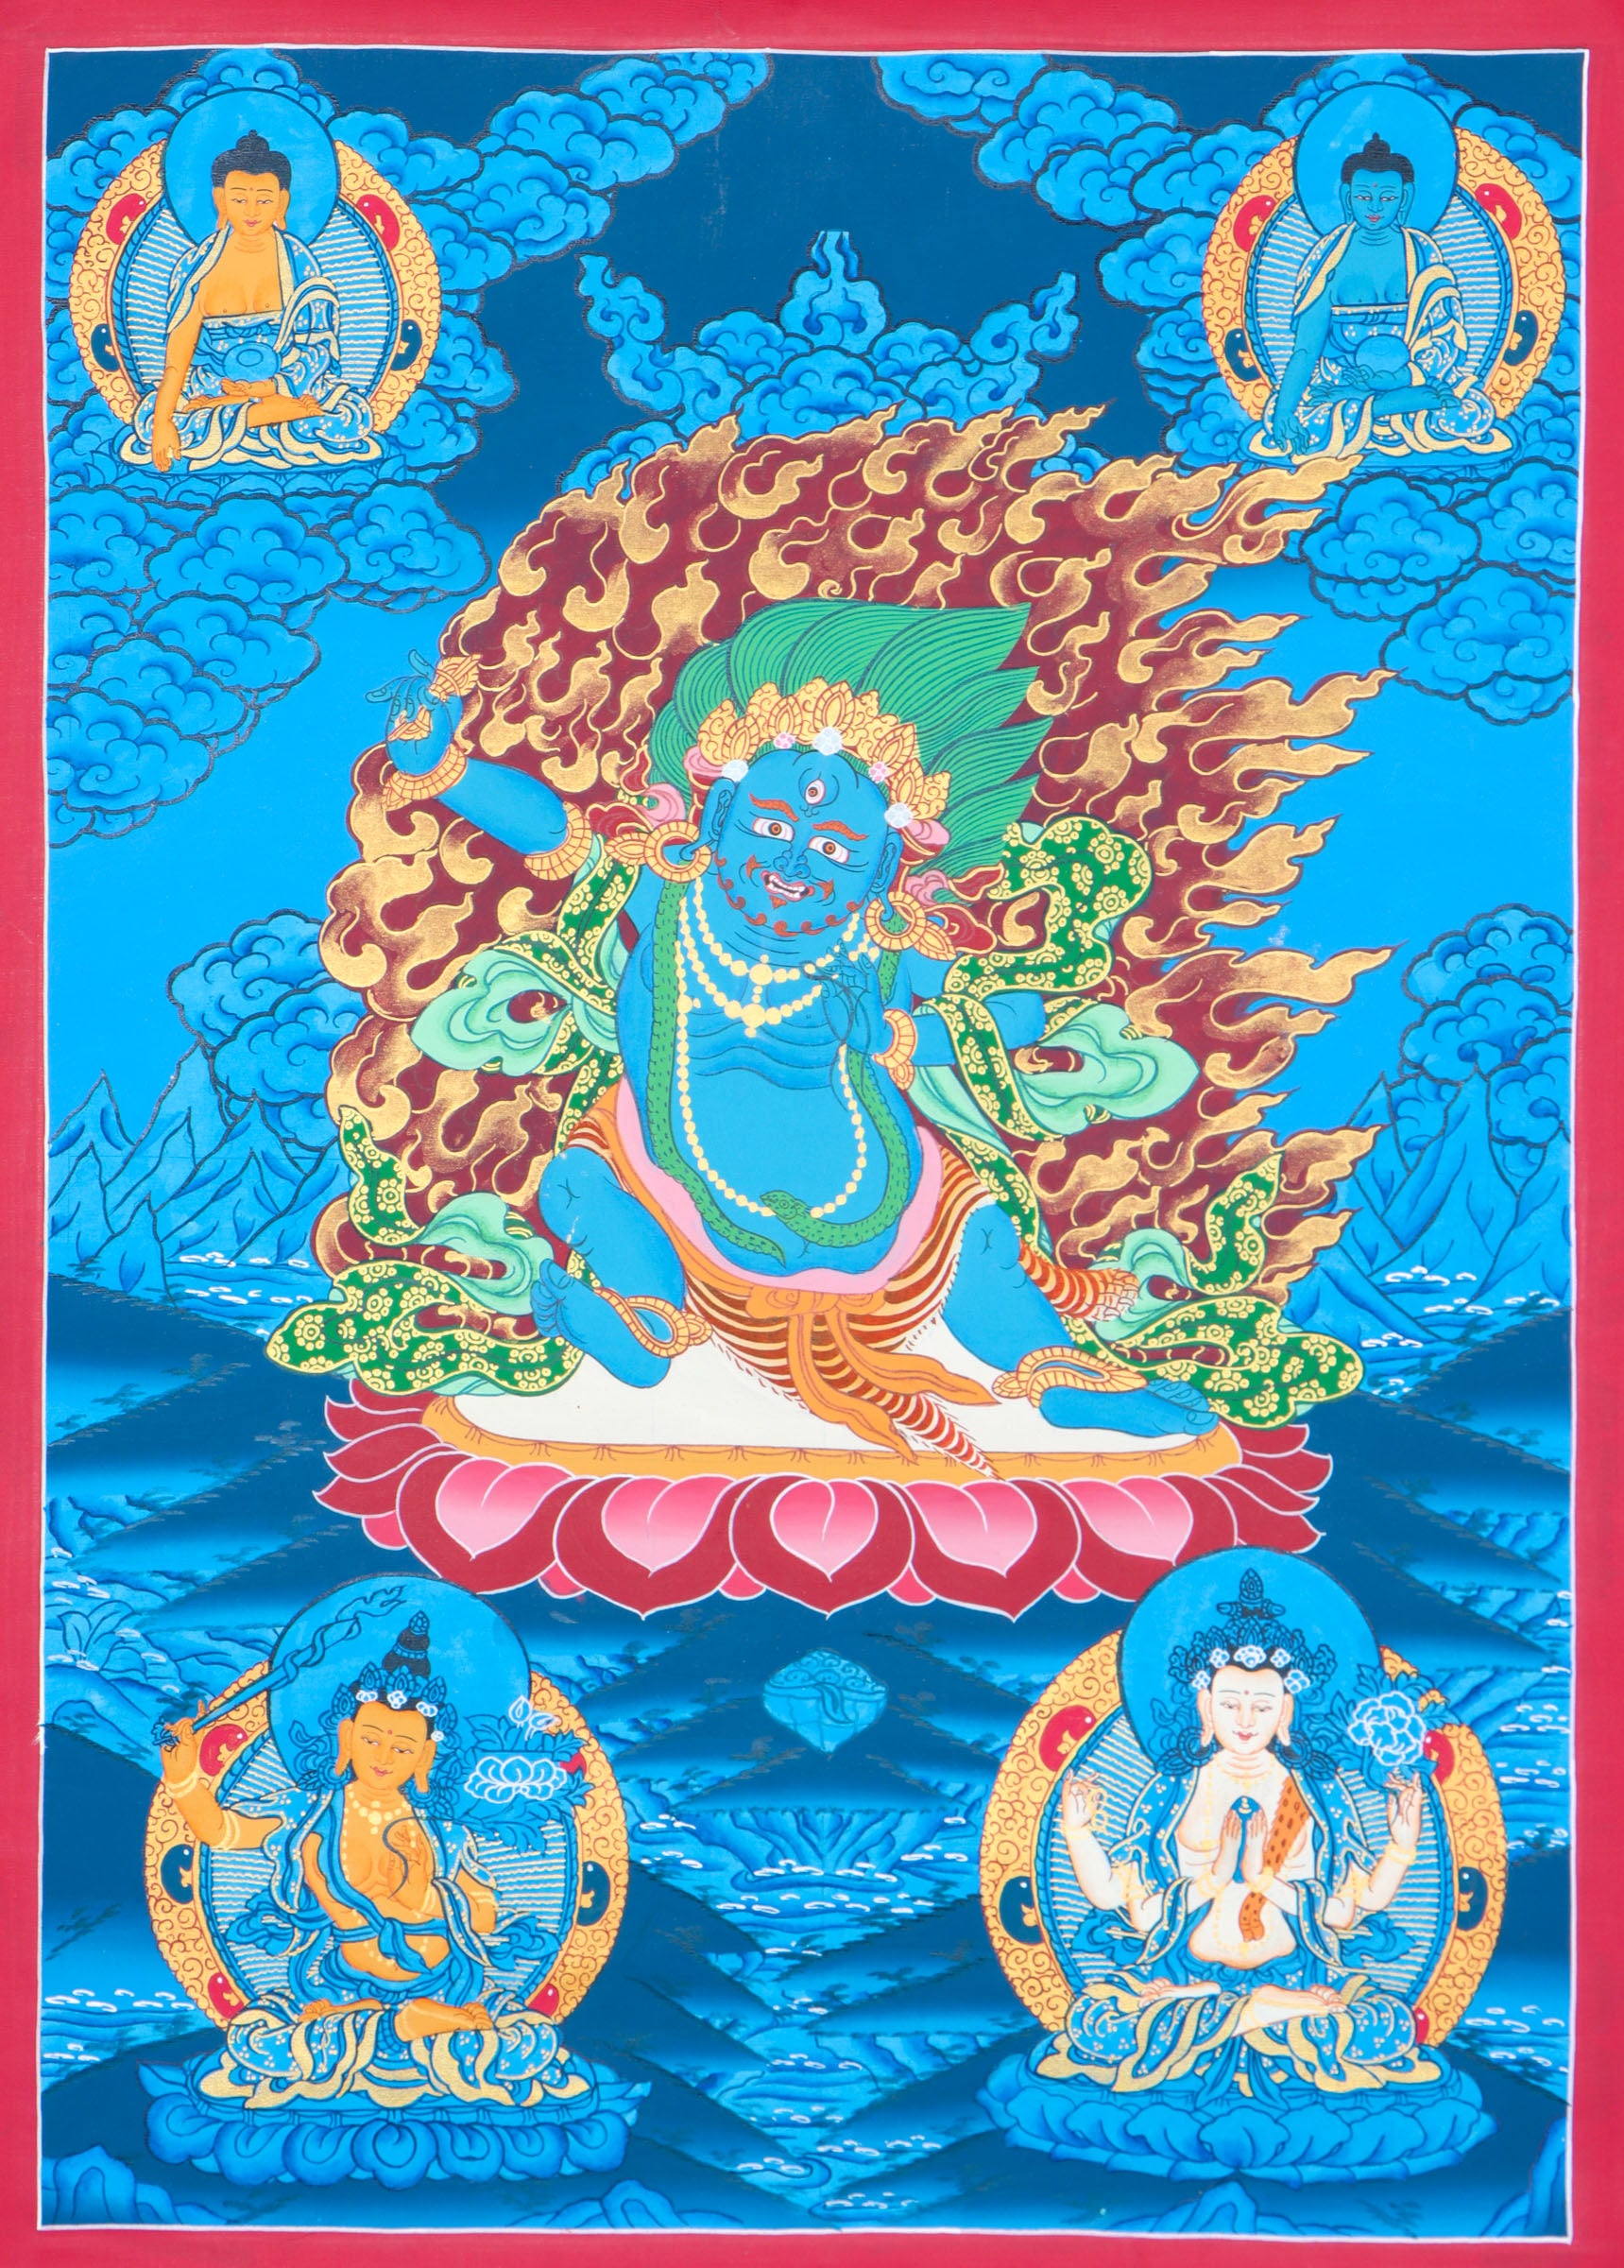 Vajrapani Thangka for removal of obstacles, spiritual strength, and protection.